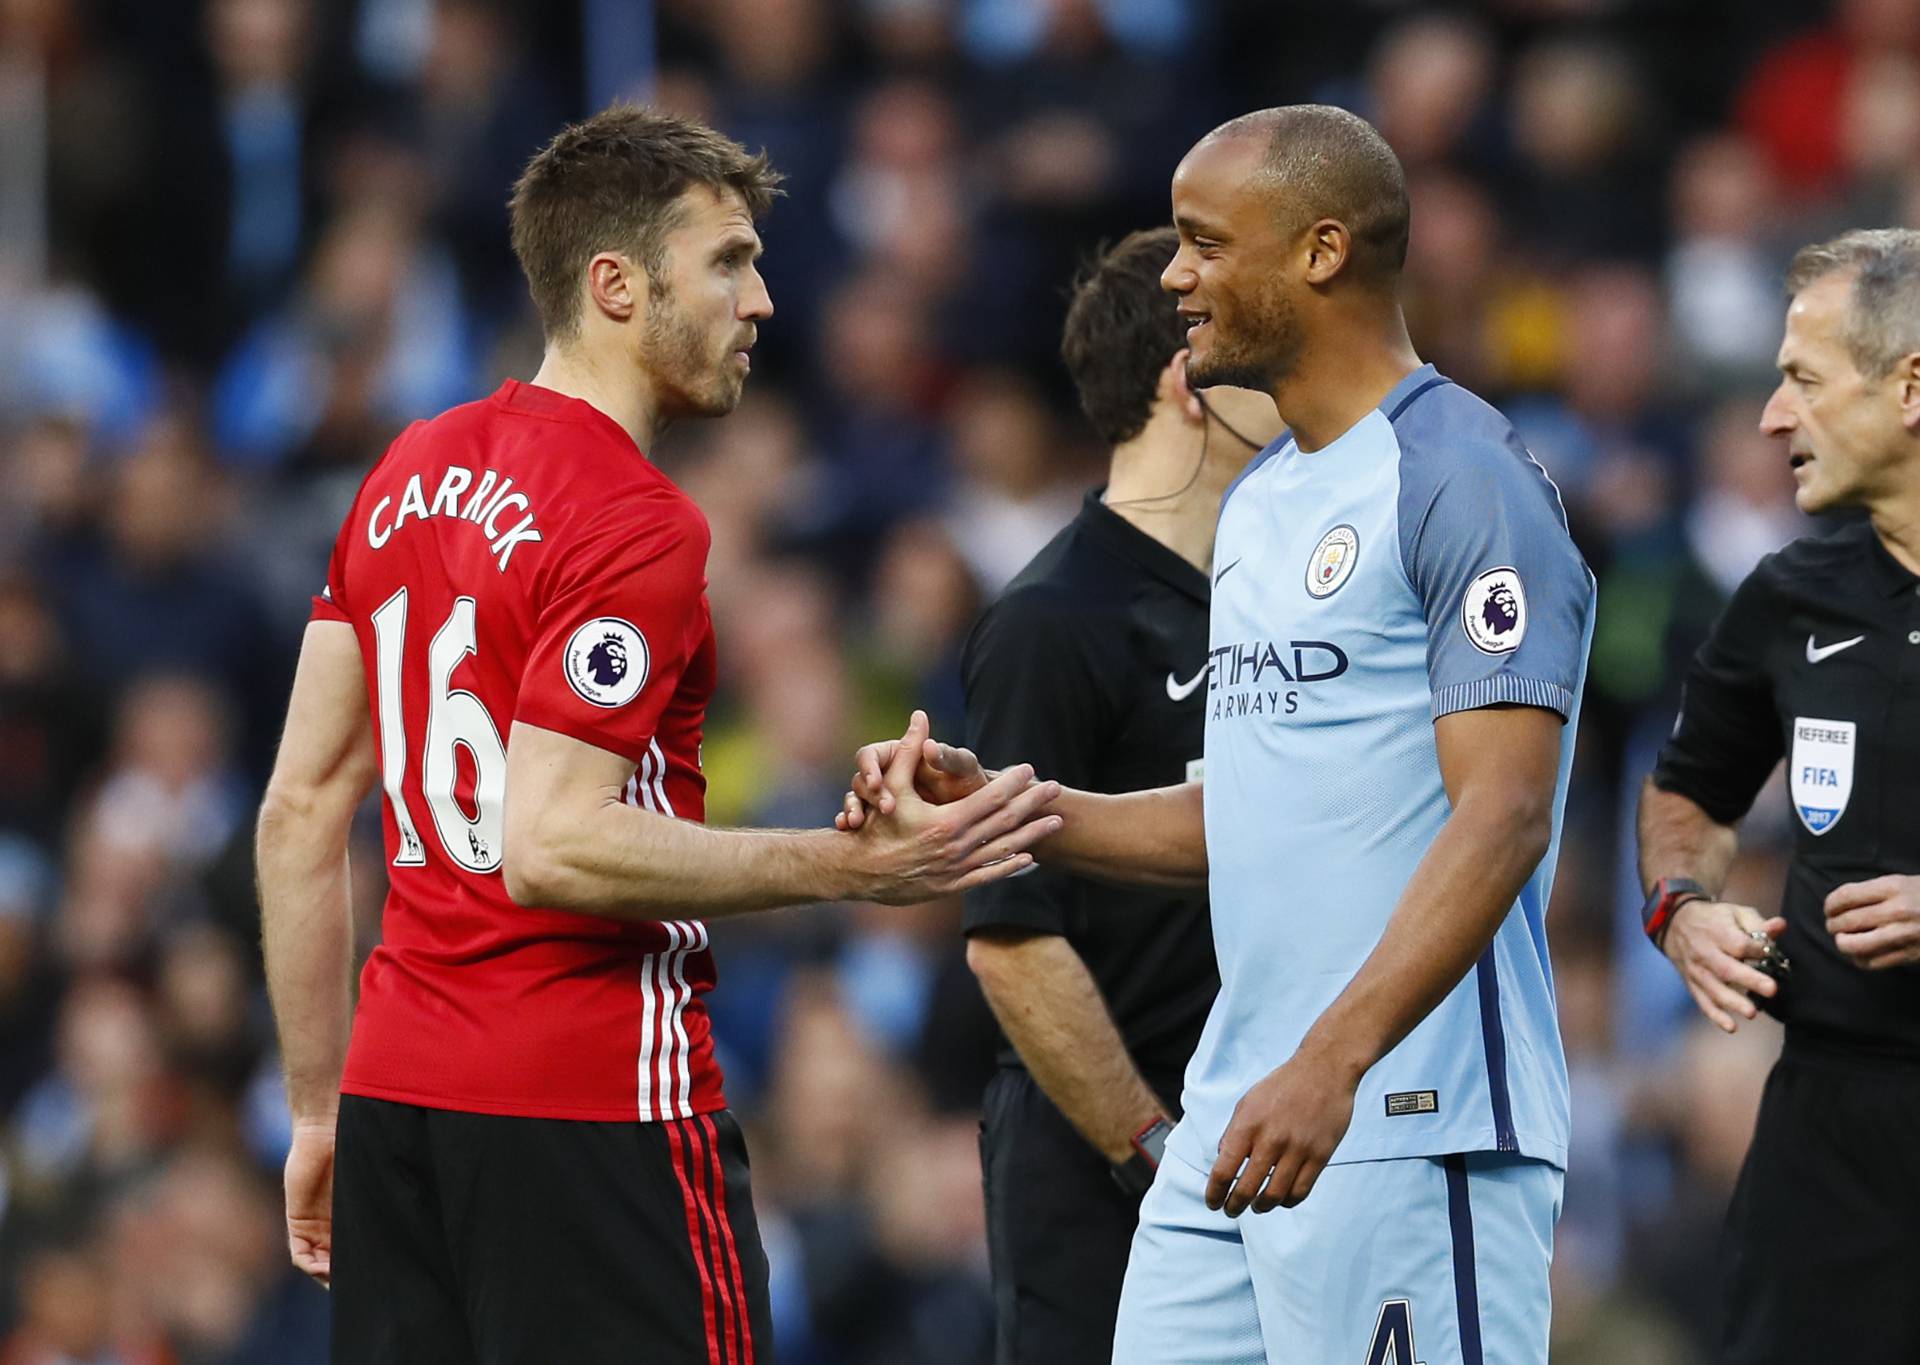 Manchester United's Michael Carrick and Manchester City's Vincent Kompany shake hands before the match